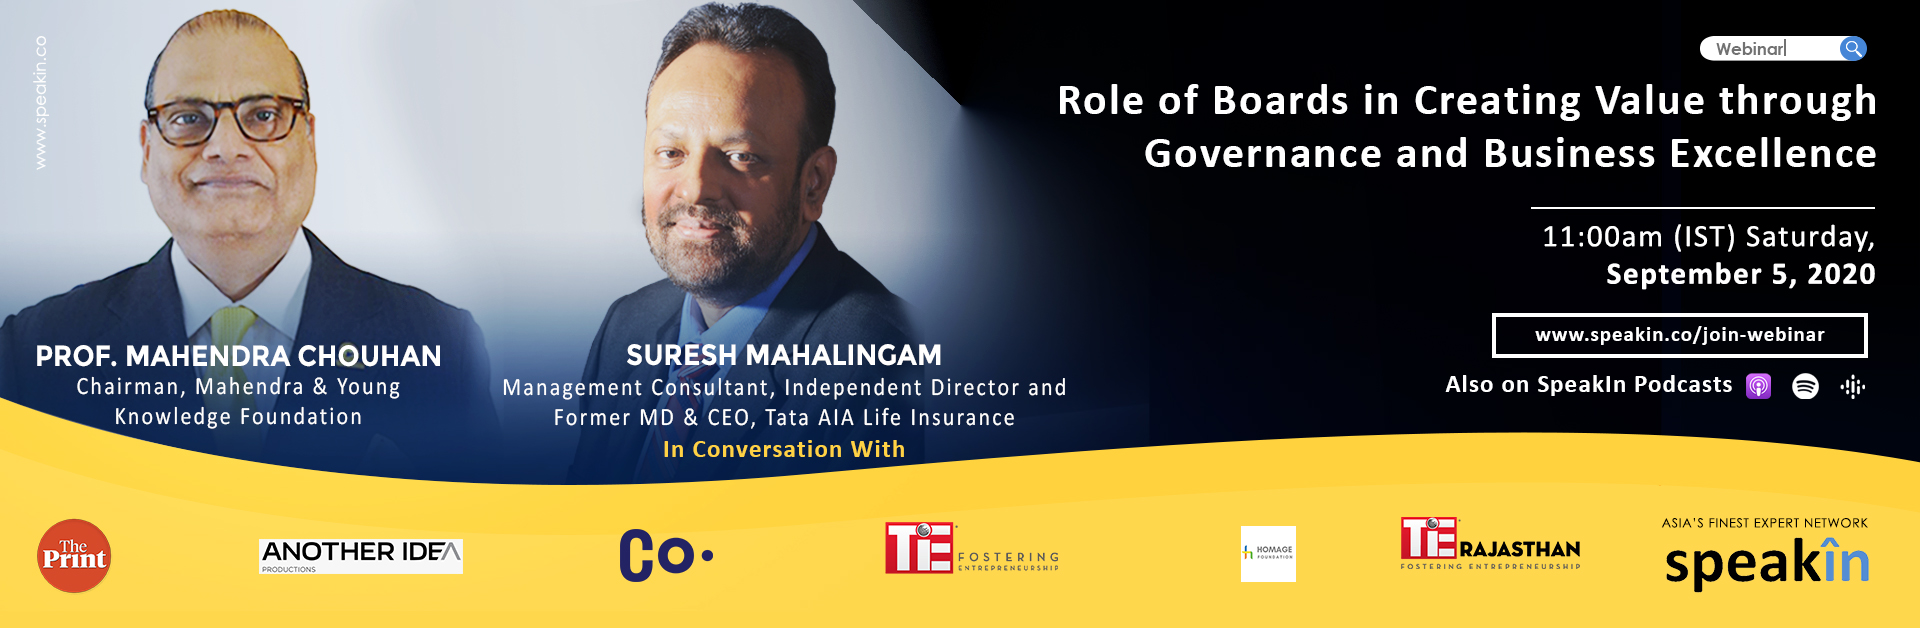 Role of Boards in Creating Value through Governance and Business Excellence